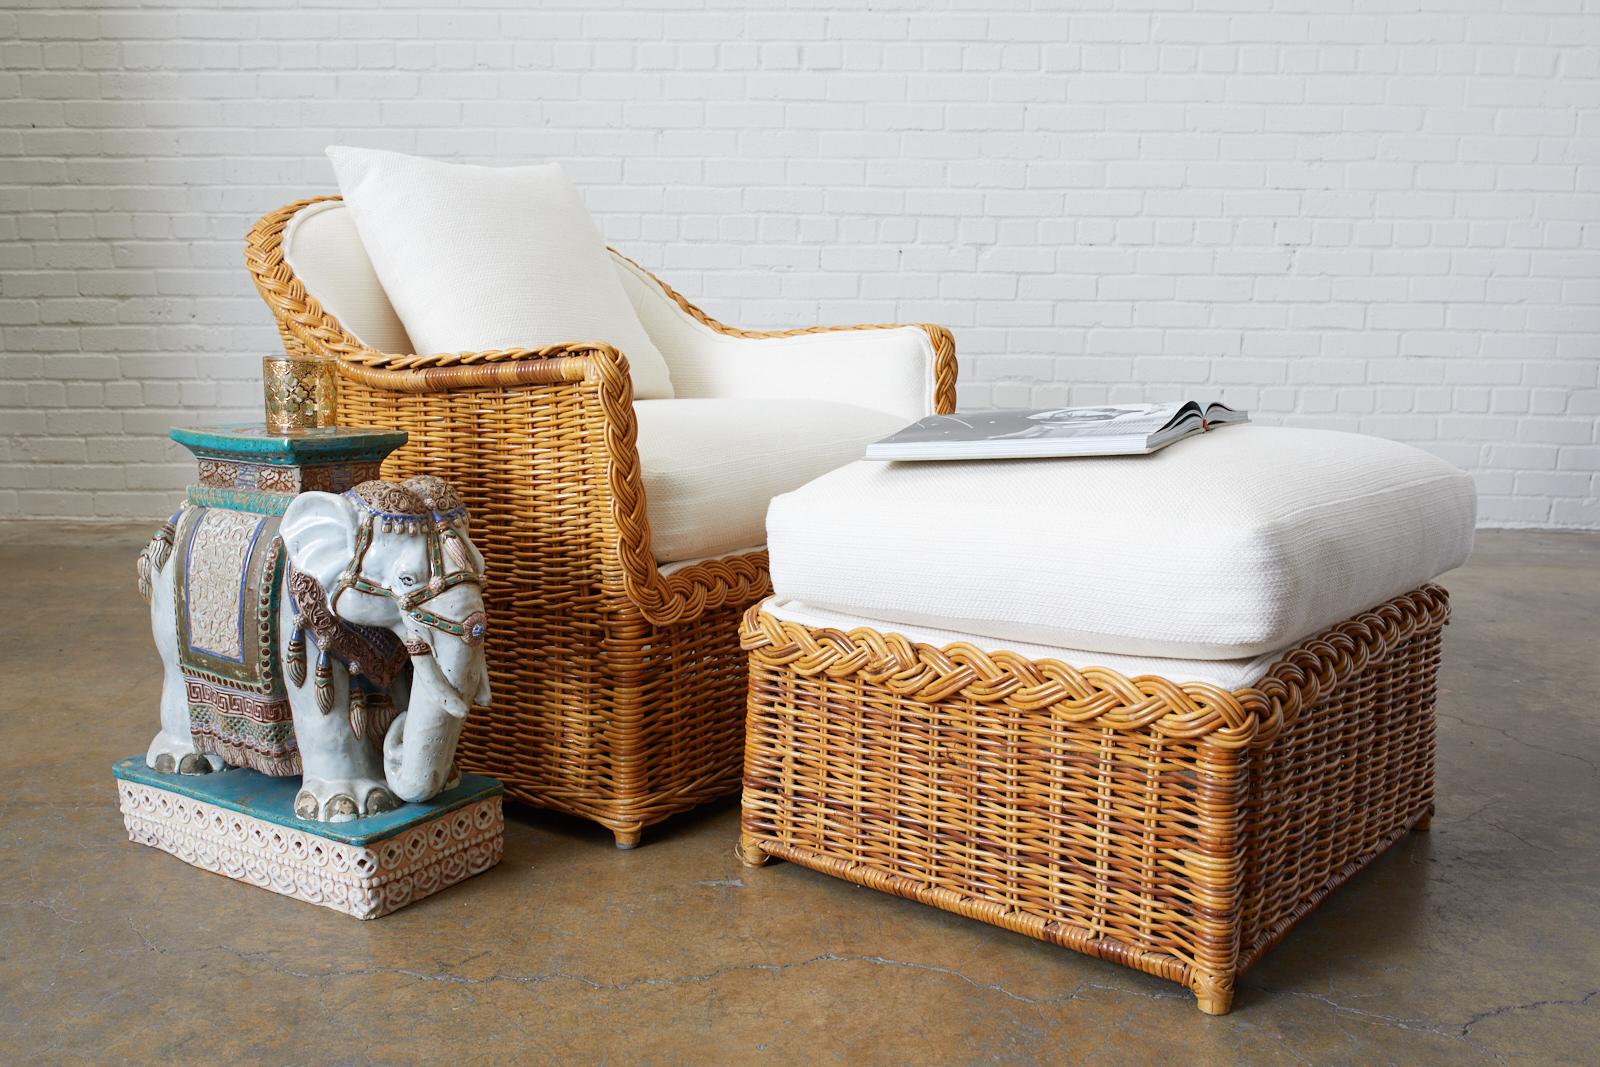 California organic modern style rattan wicker lounge chair and ottoman by McGuire. Constructed with rattan frames covered with wicker having braided arms and trim. The chair is well made with a waisted hour glass form. The matching ottoman measures